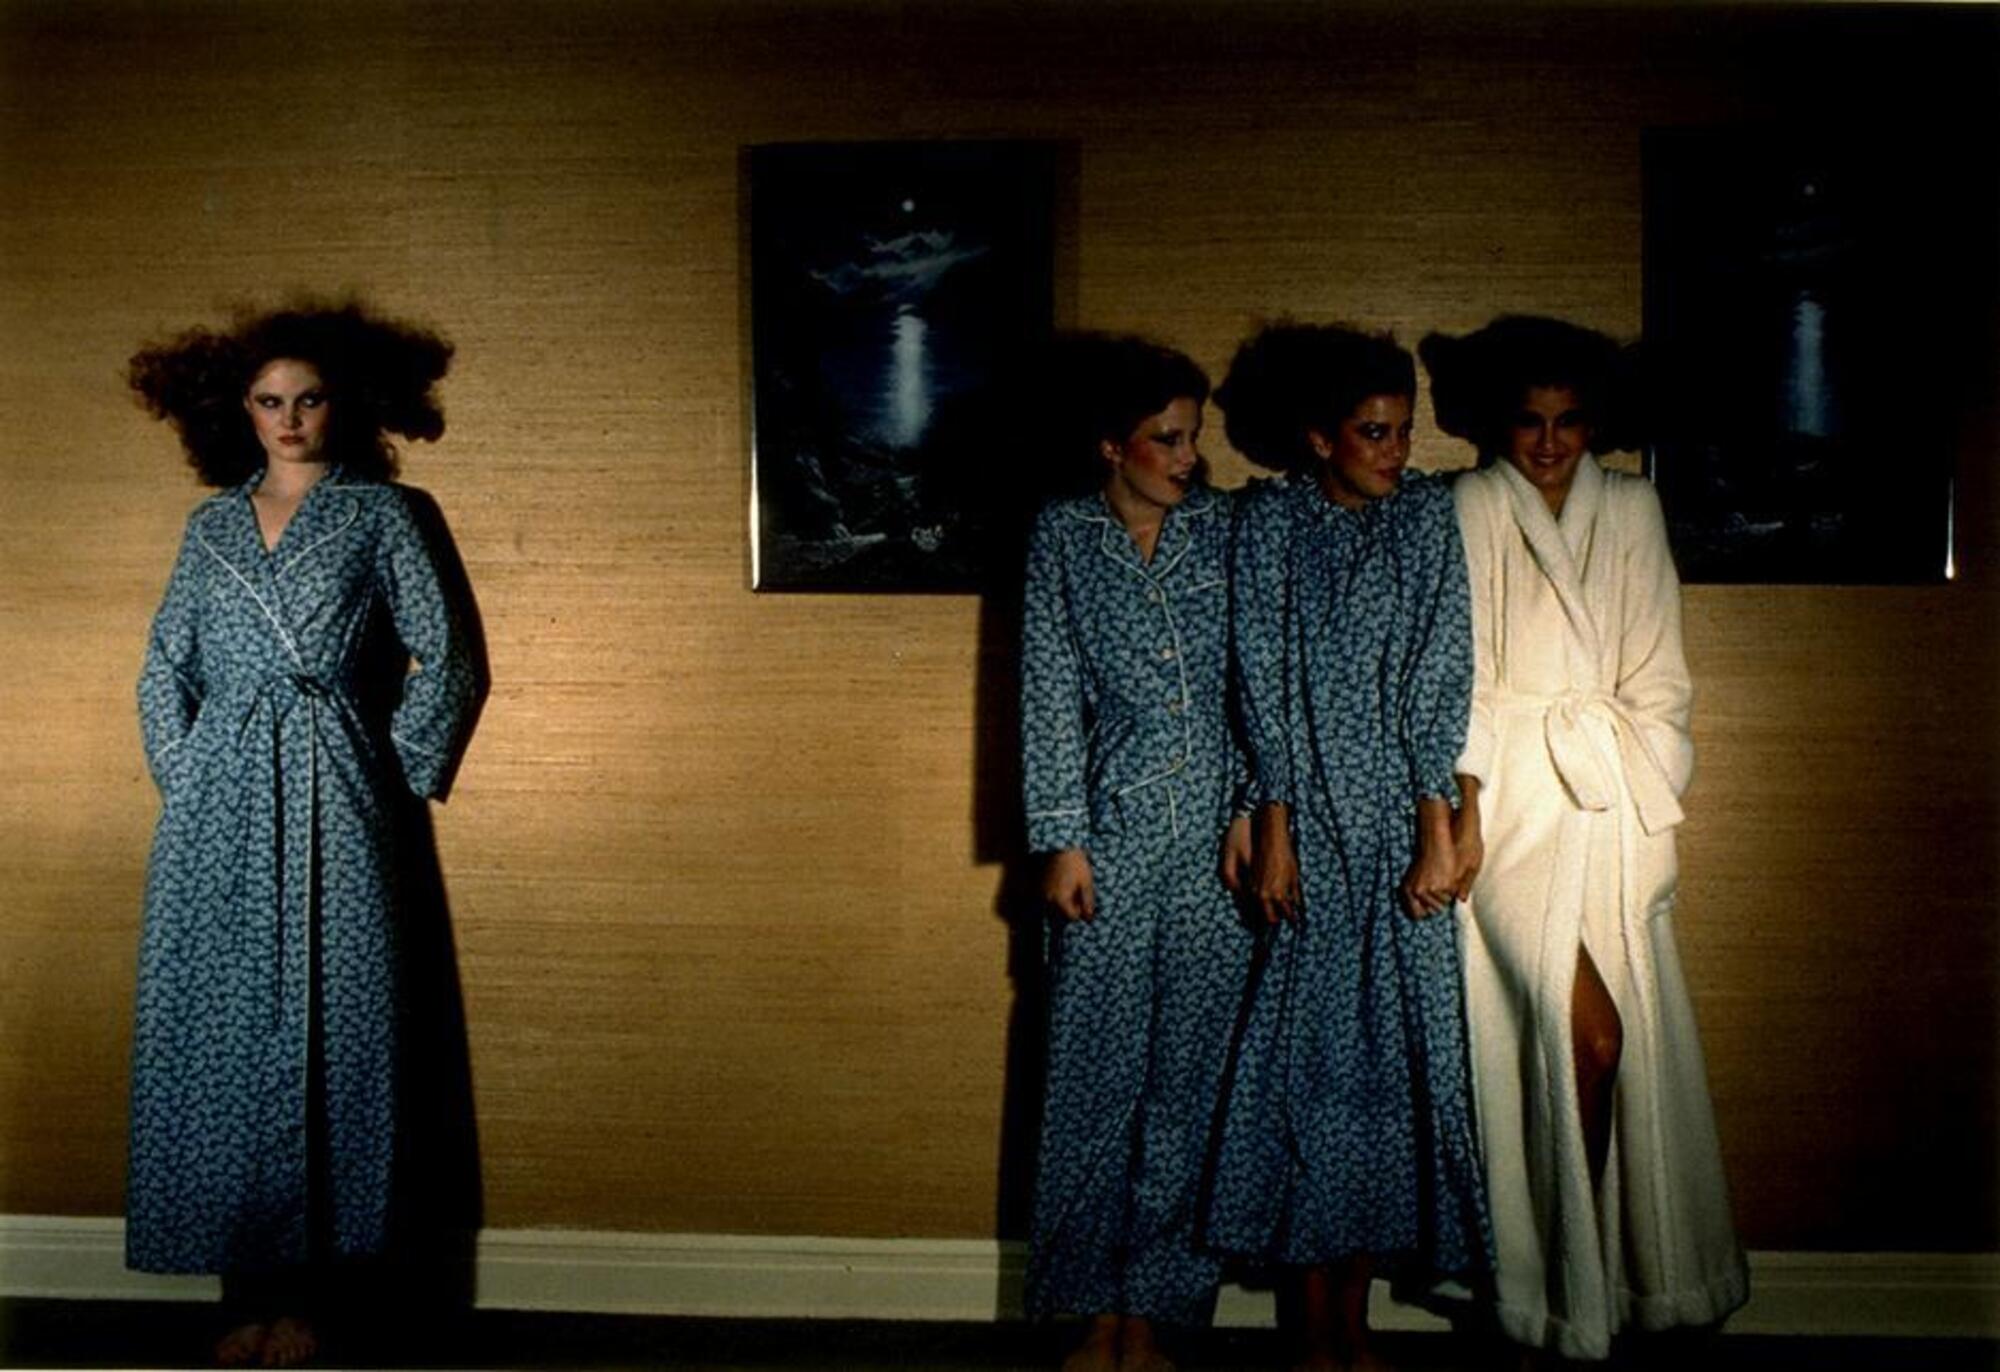 This work is a color photograph of four models standing against a wood-paneled wall. Two identical decorative prints of a night scene hang behind them. On the right, three models are framed by these wall hangings, while another model to the left stands alone and skeptically eyes the happy trio.